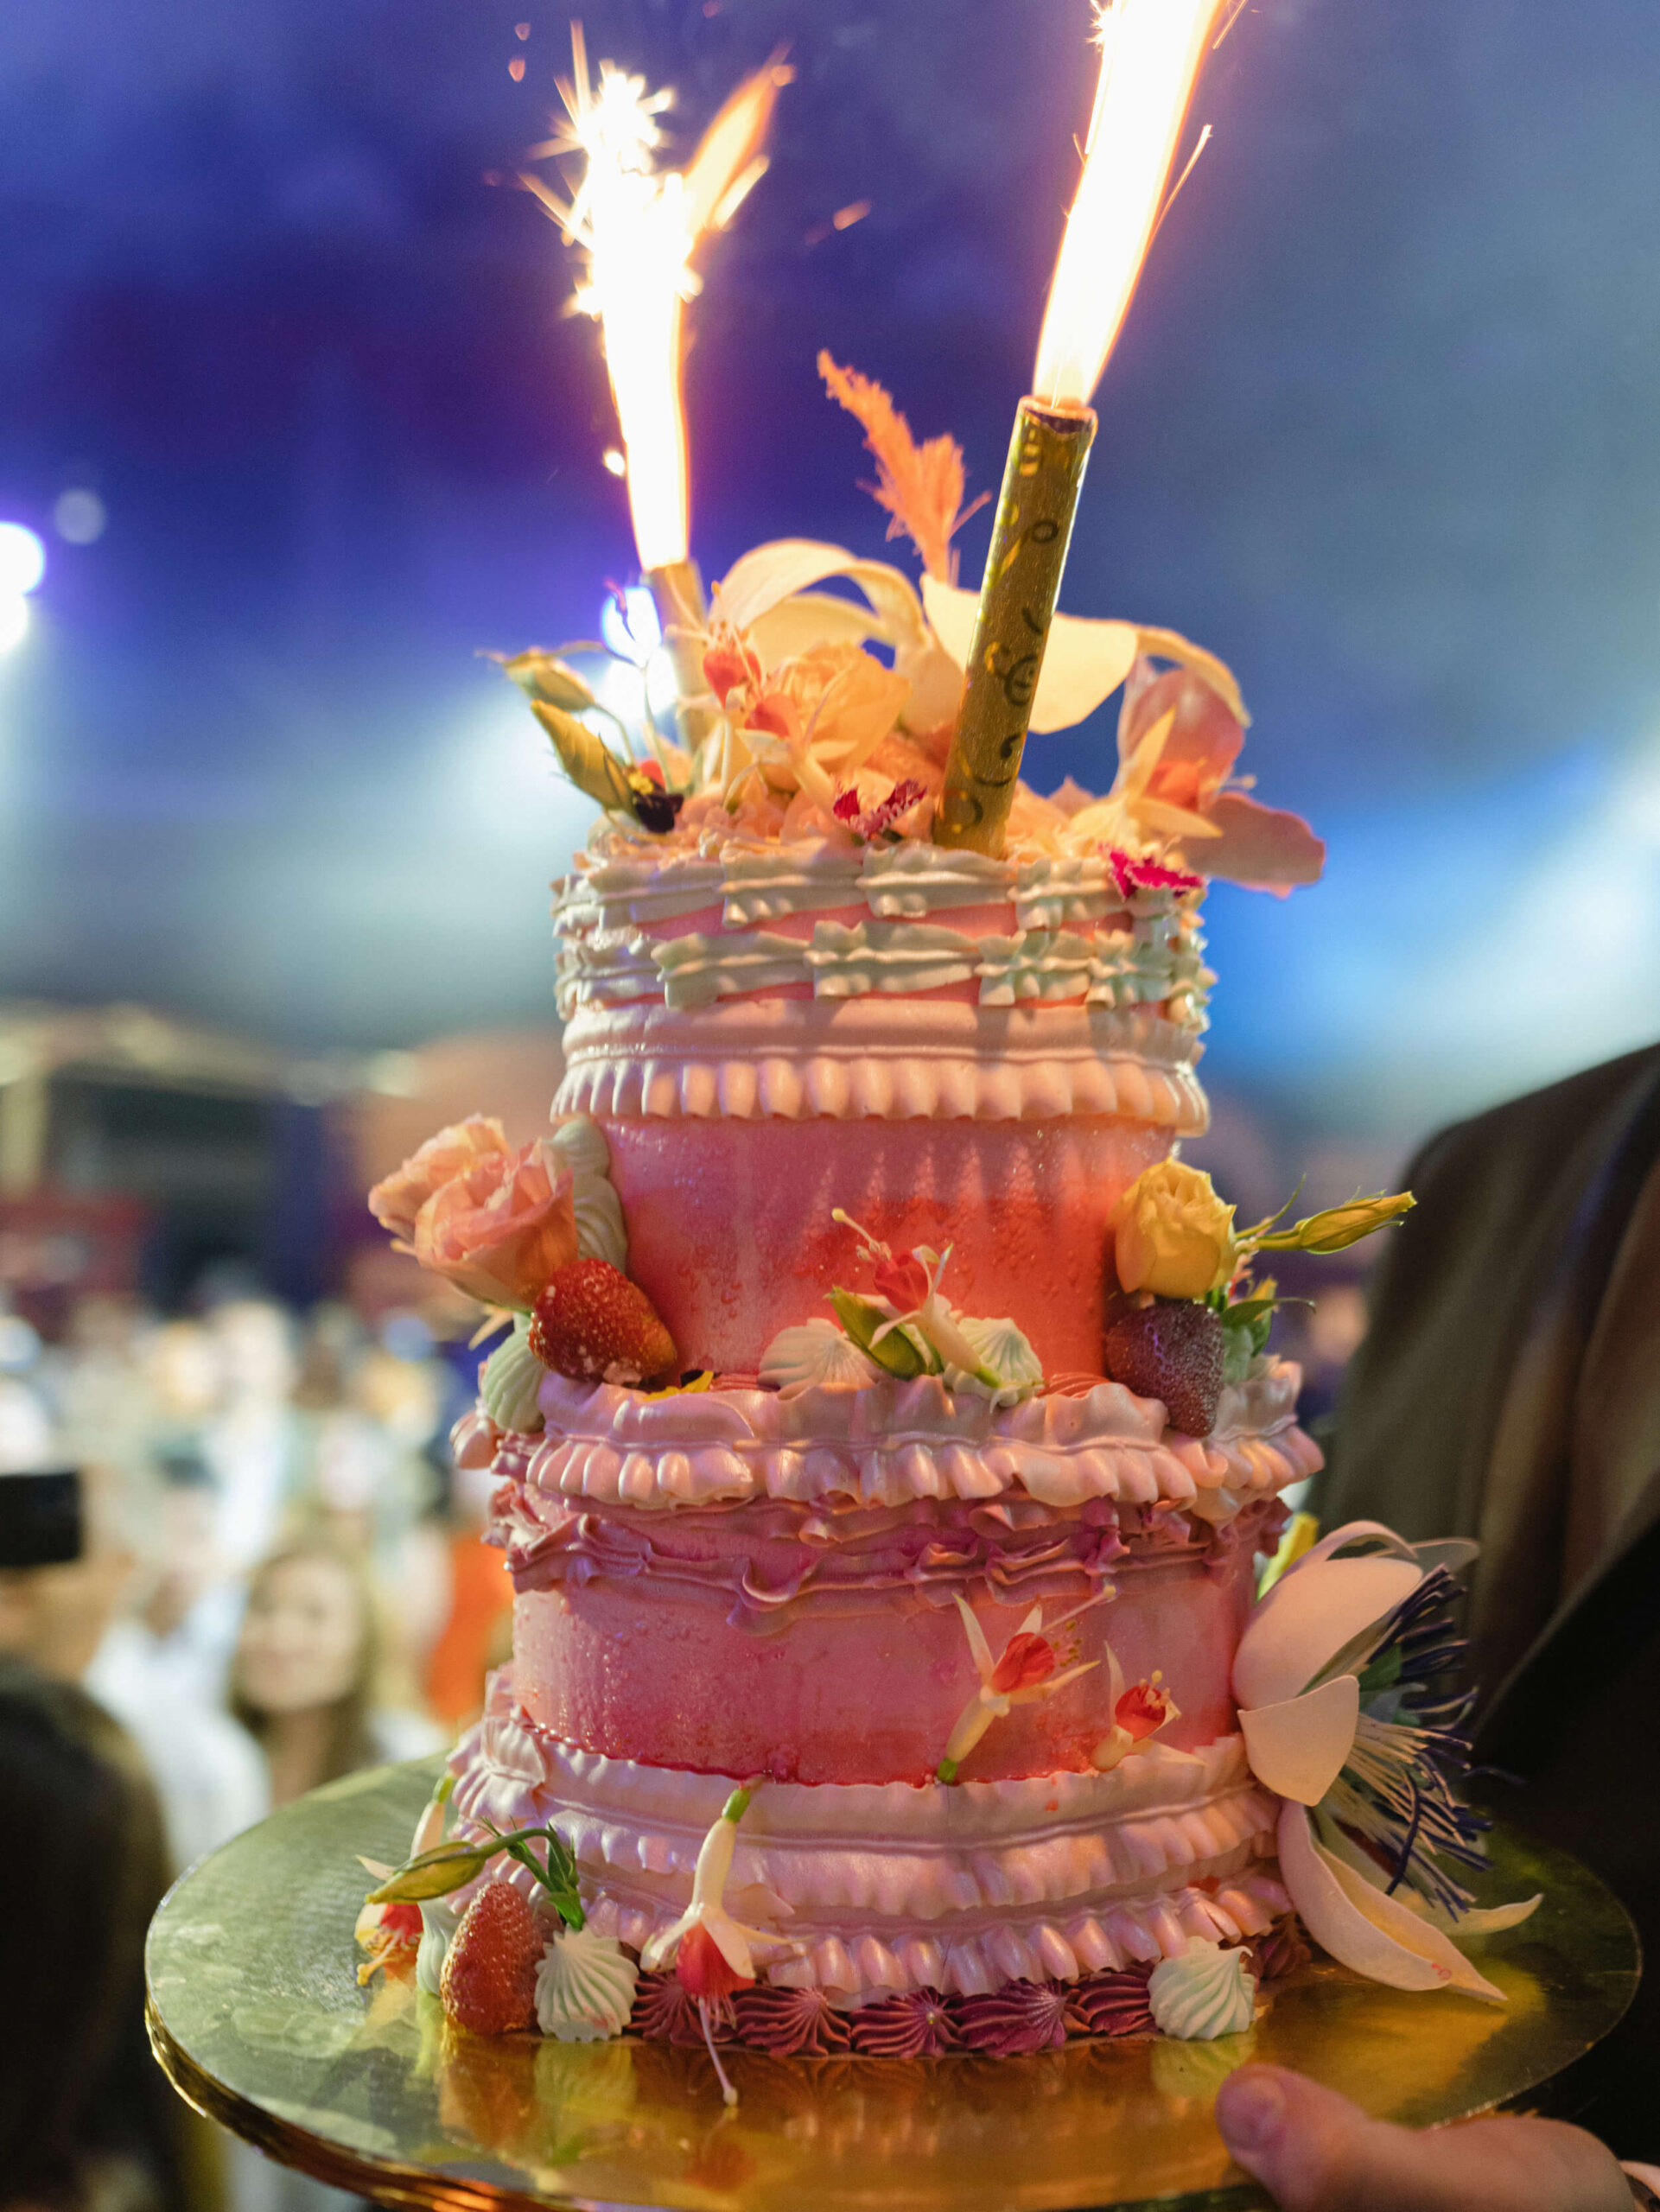 A decorative cake with sparklers